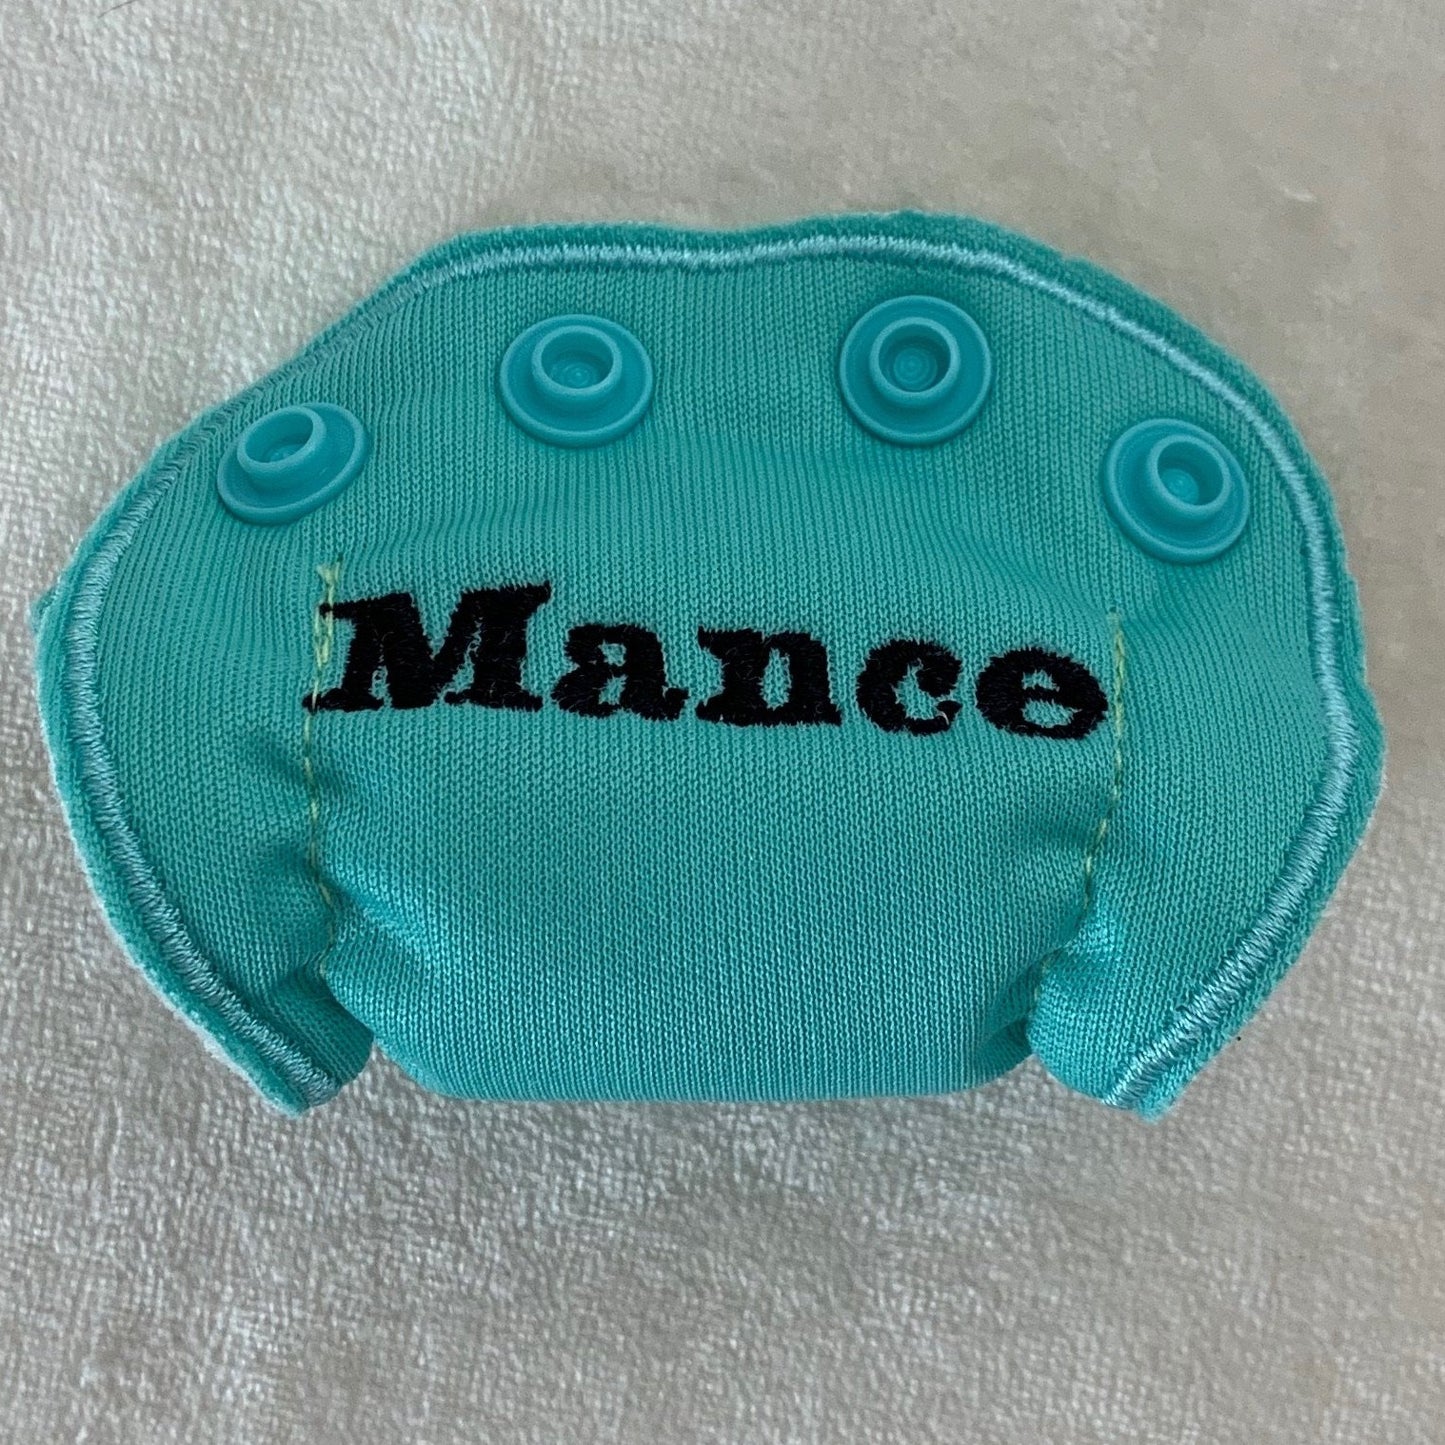 Add "Name" - CAN NOT BE ADDED TO PRE MADE QUICKSHIP DIAPERS